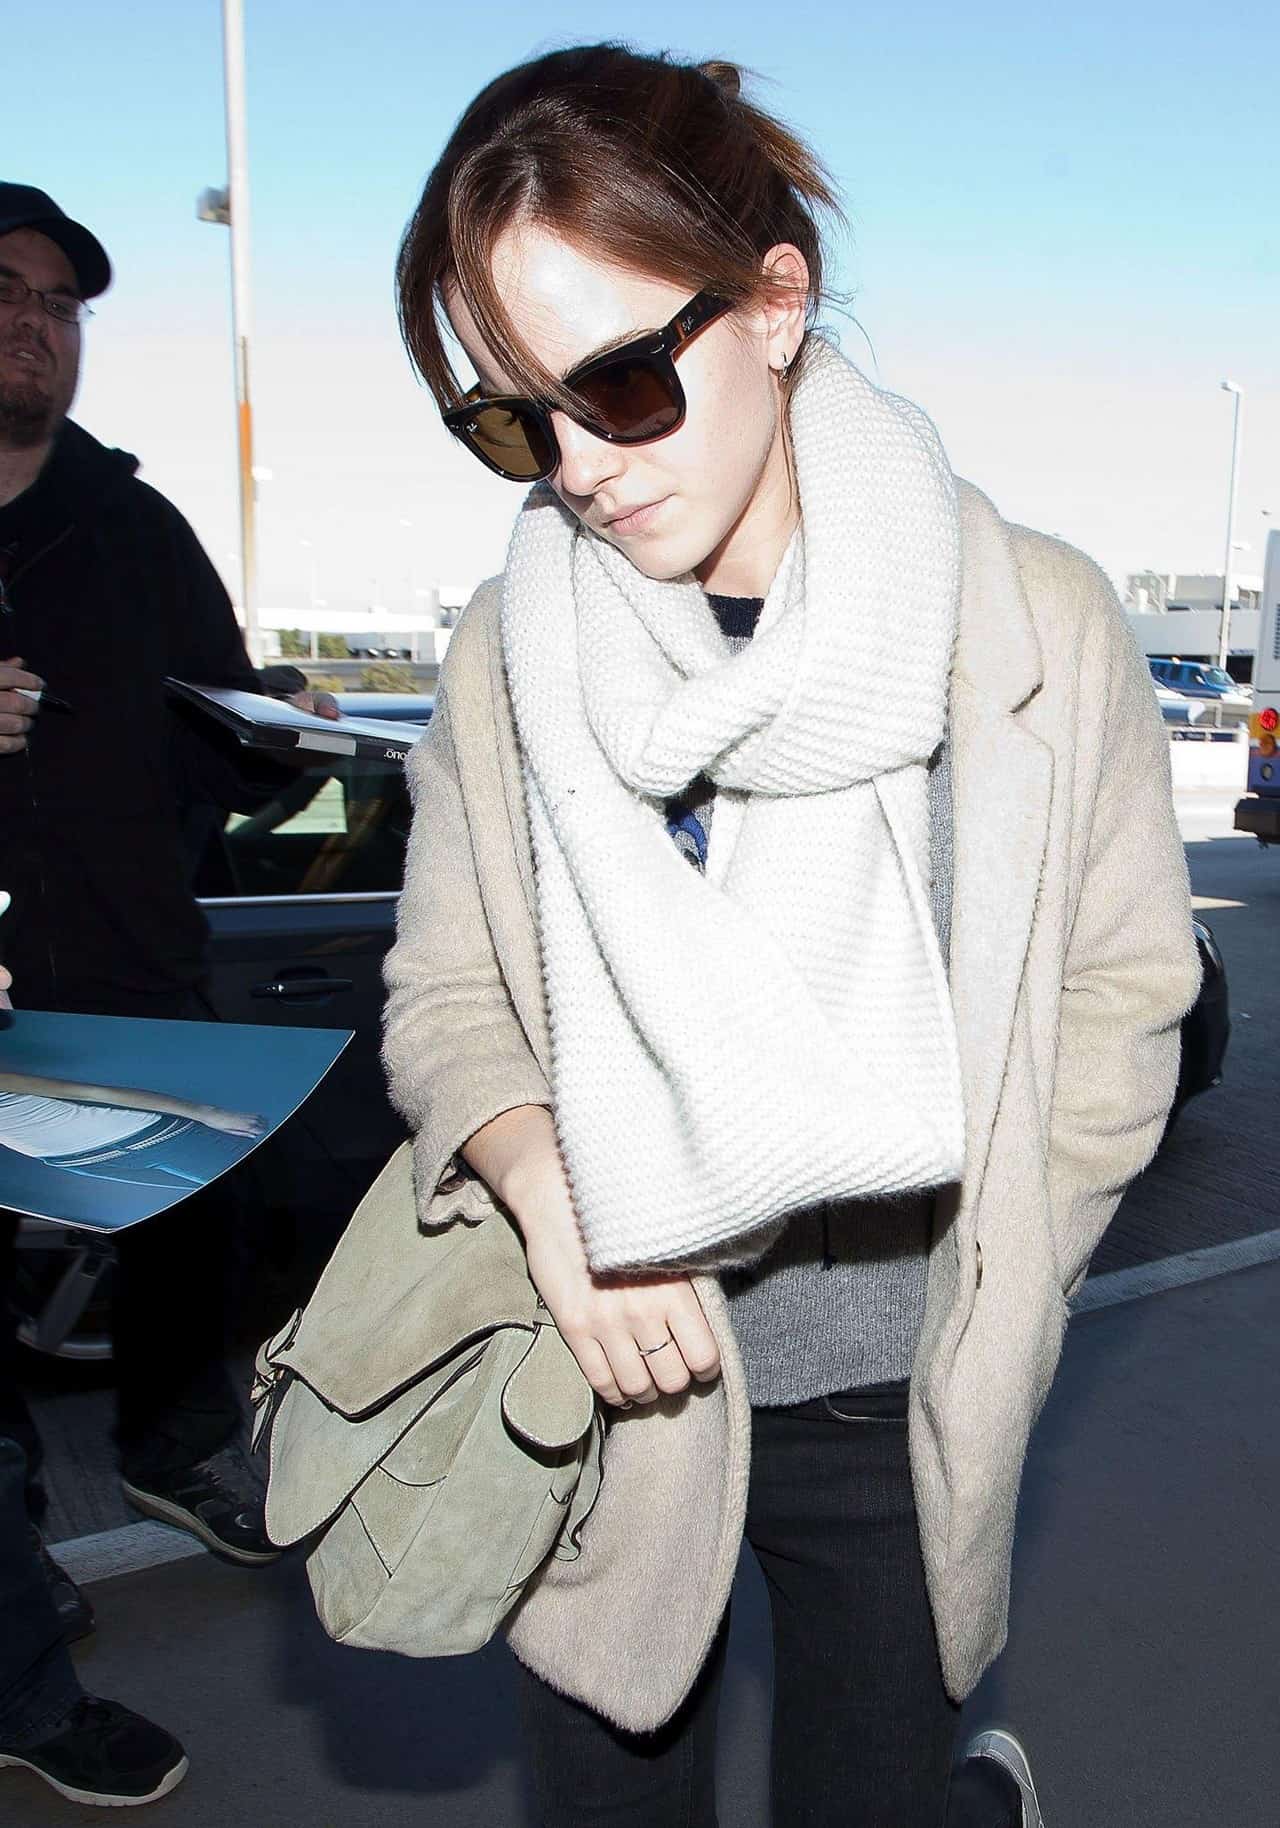 Emma Watson Seen Arriving Effortlessly Chic at LAX Airport